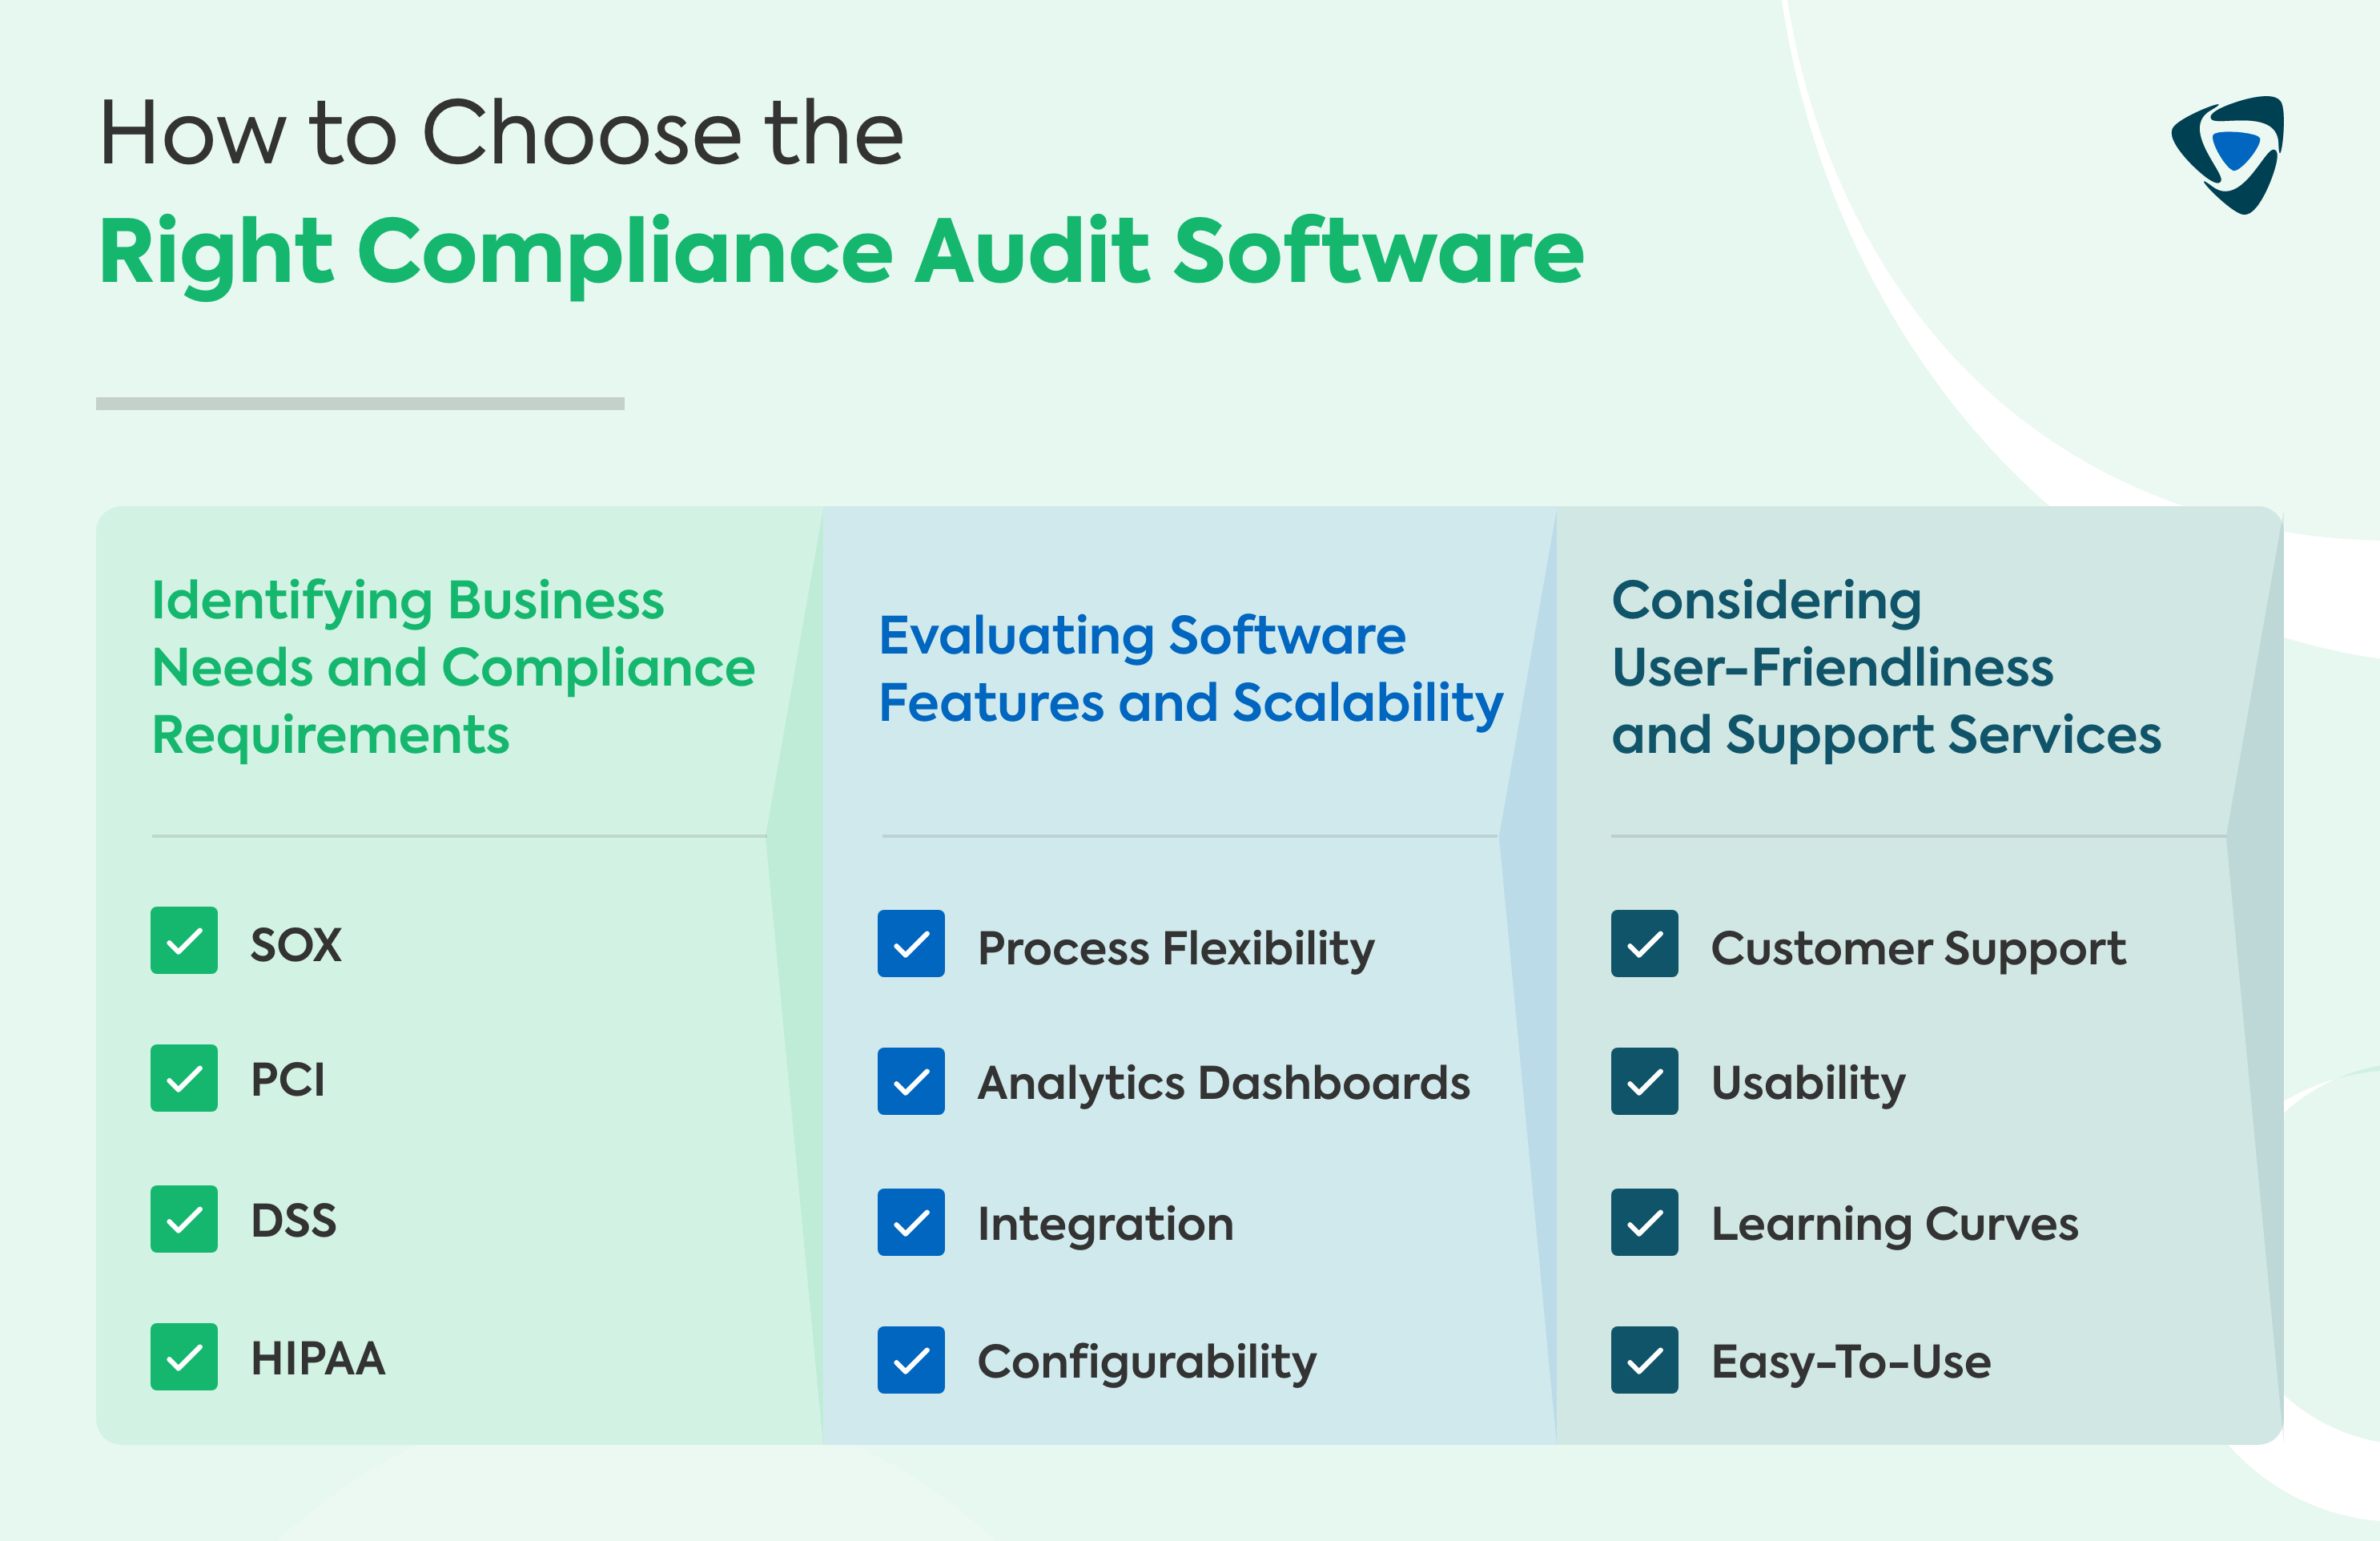 How to Choose the Right Compliance Audit Software